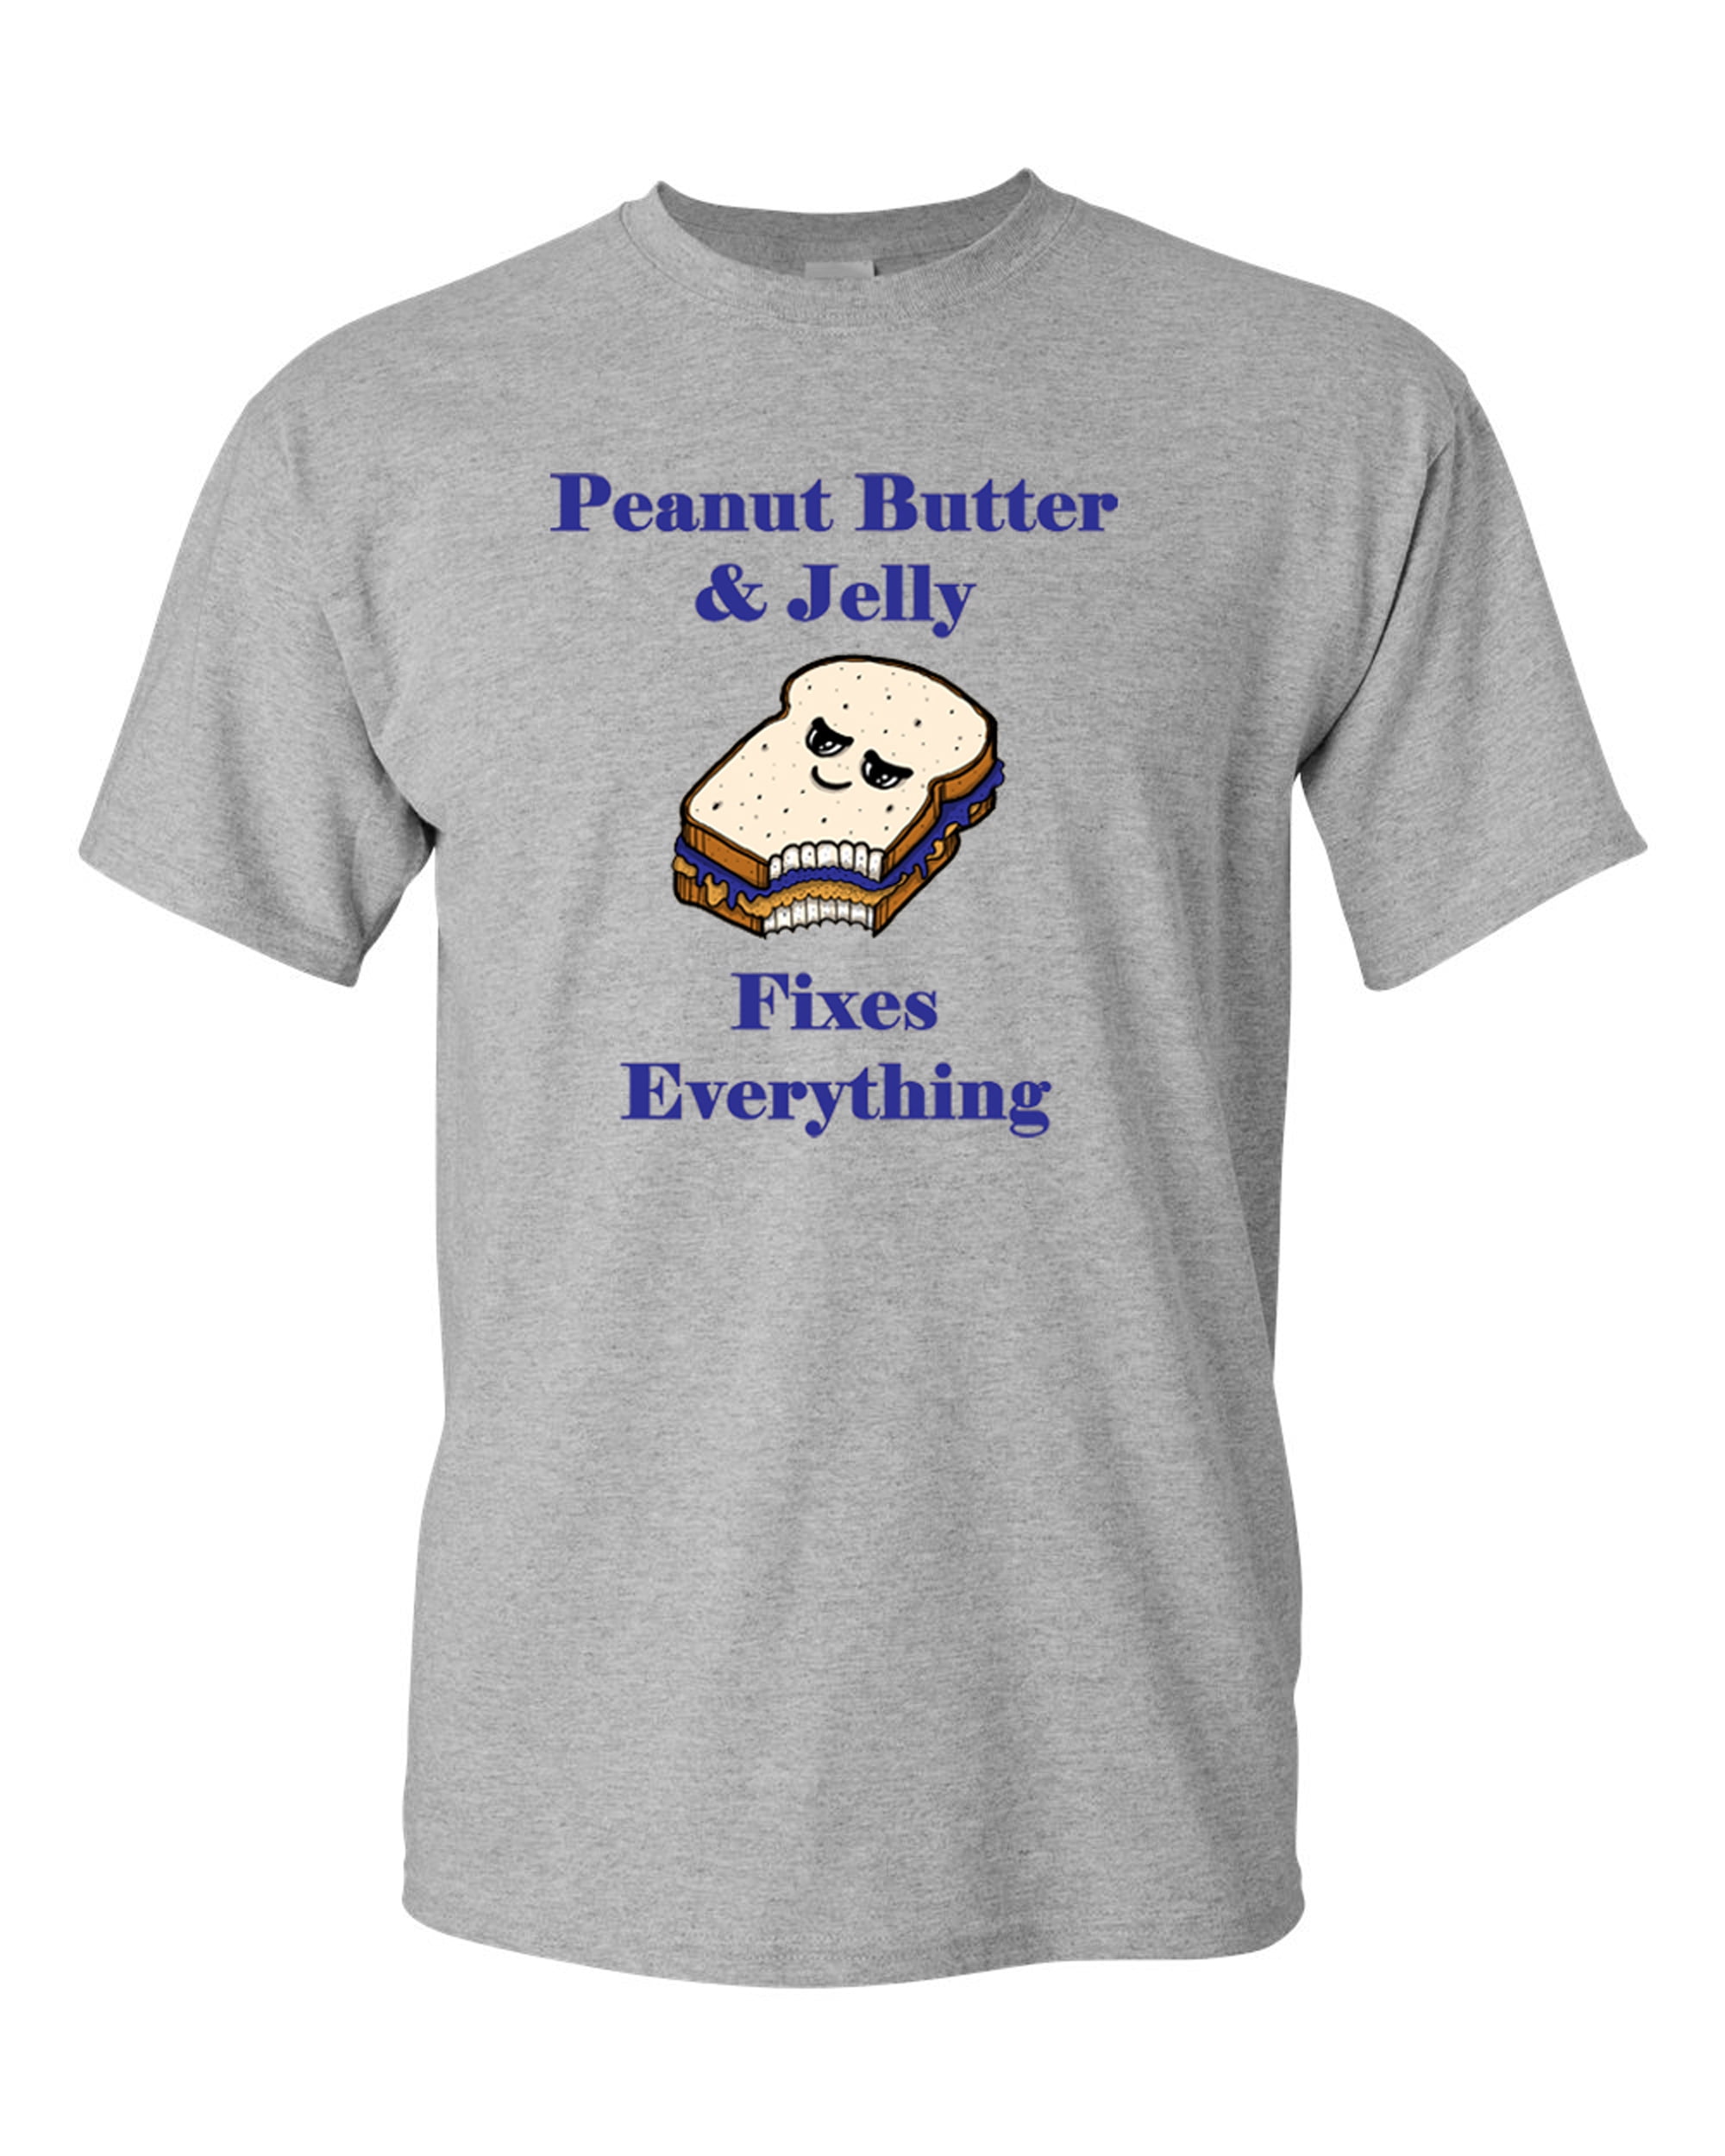 Augusta Sportswear Peanut Butter And Jelly Fixes Everything Adult Dt T Shirts Tee Walmart Com Walmart Com - peanut butter hair roblox